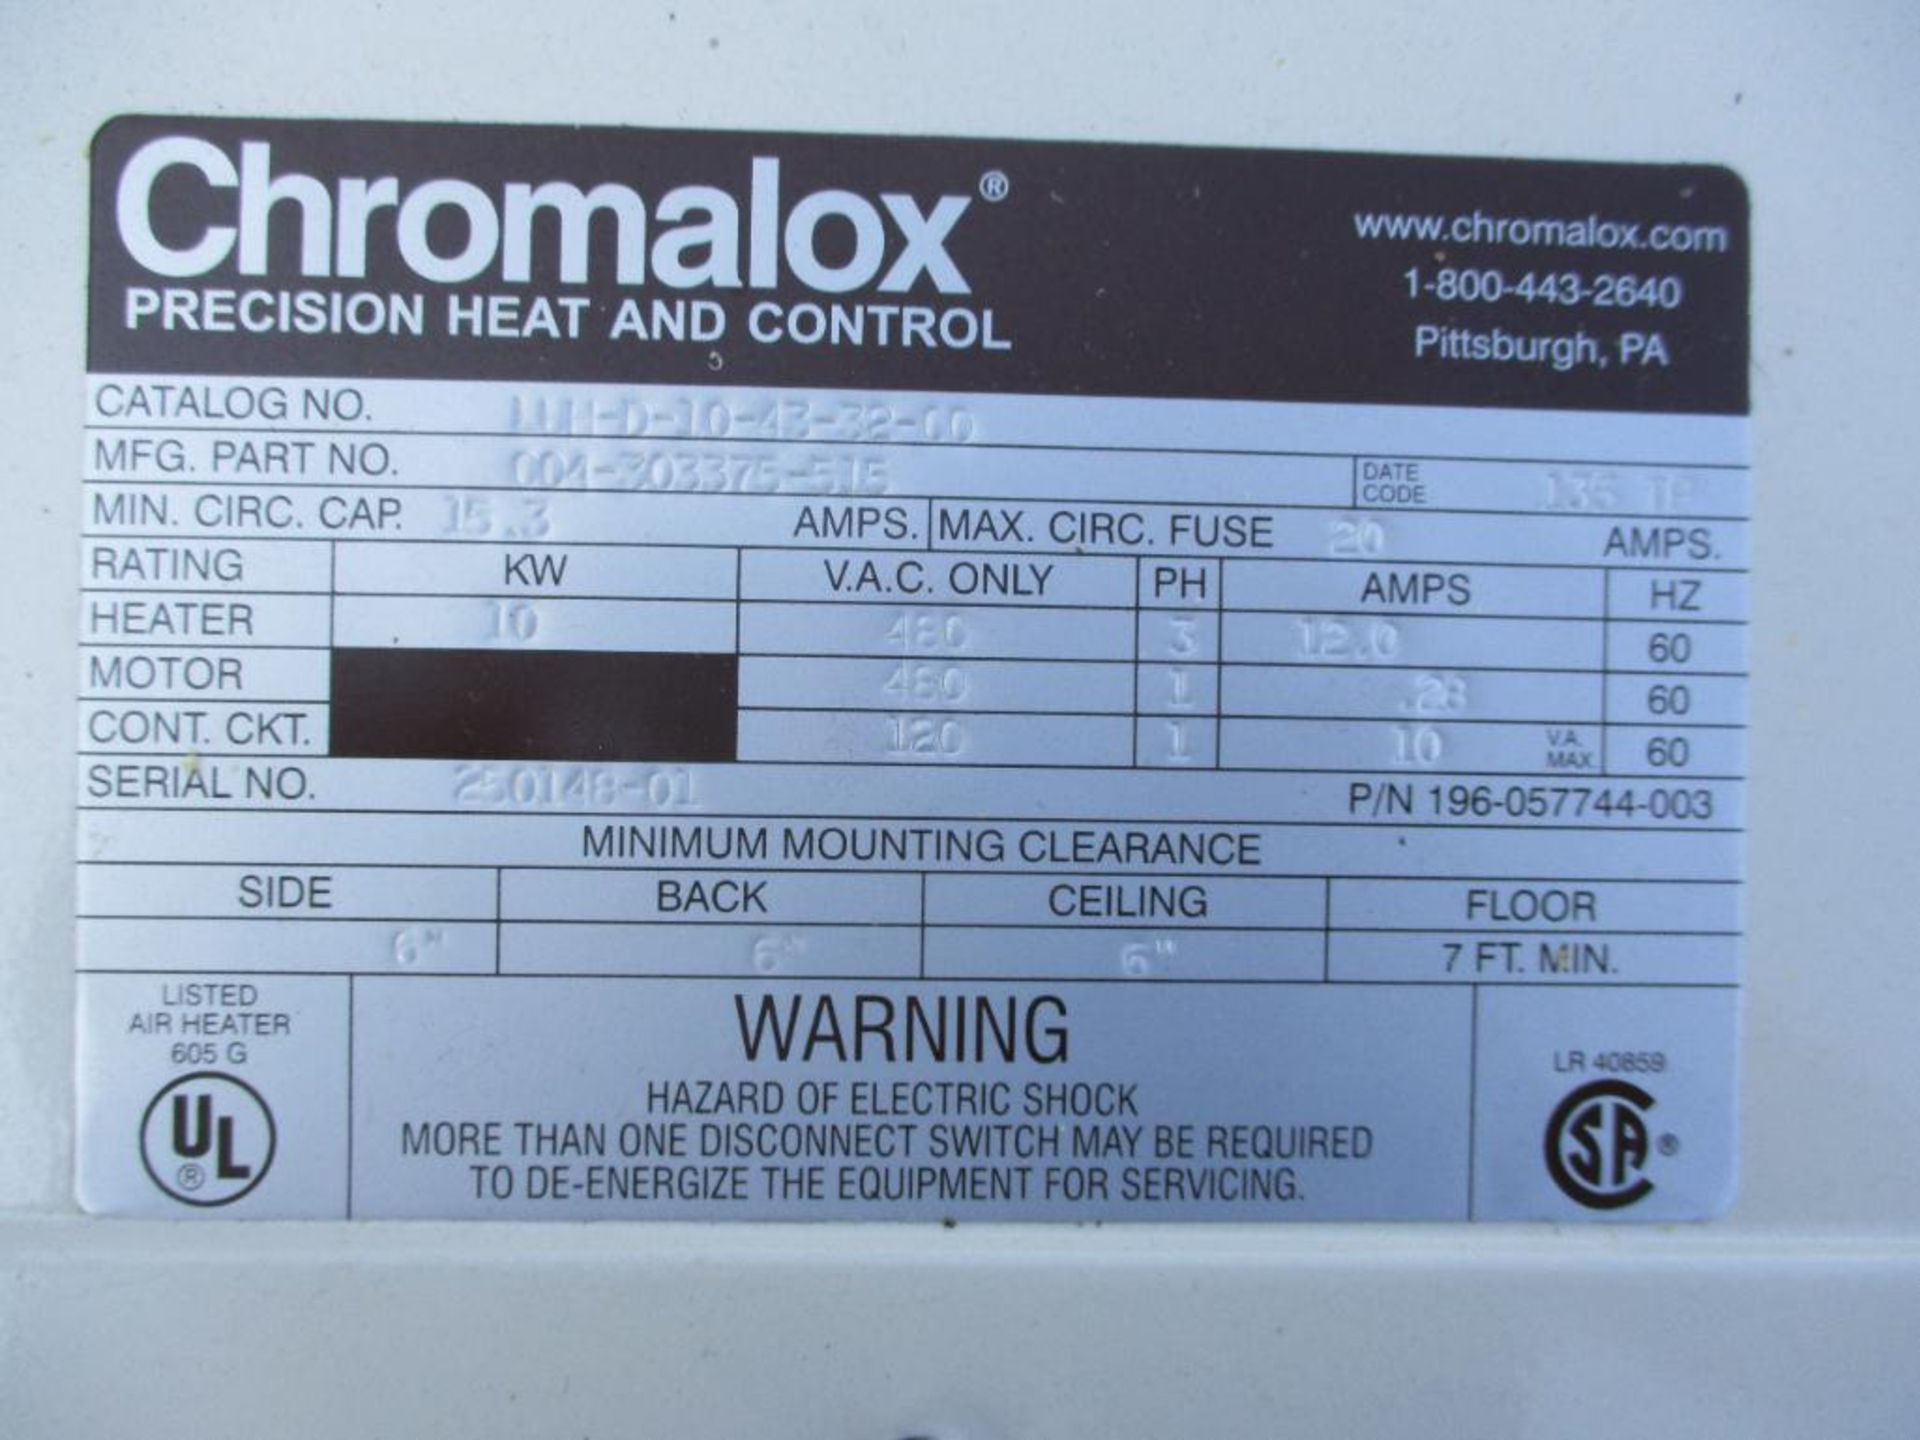 CHROMALOX TYPE LUH HORIZONTAL UNIT HEATER CATALOG NUMBER LUH-D-10-43-32-00 PART NUMBER 004-303375-51 - Image 4 of 4